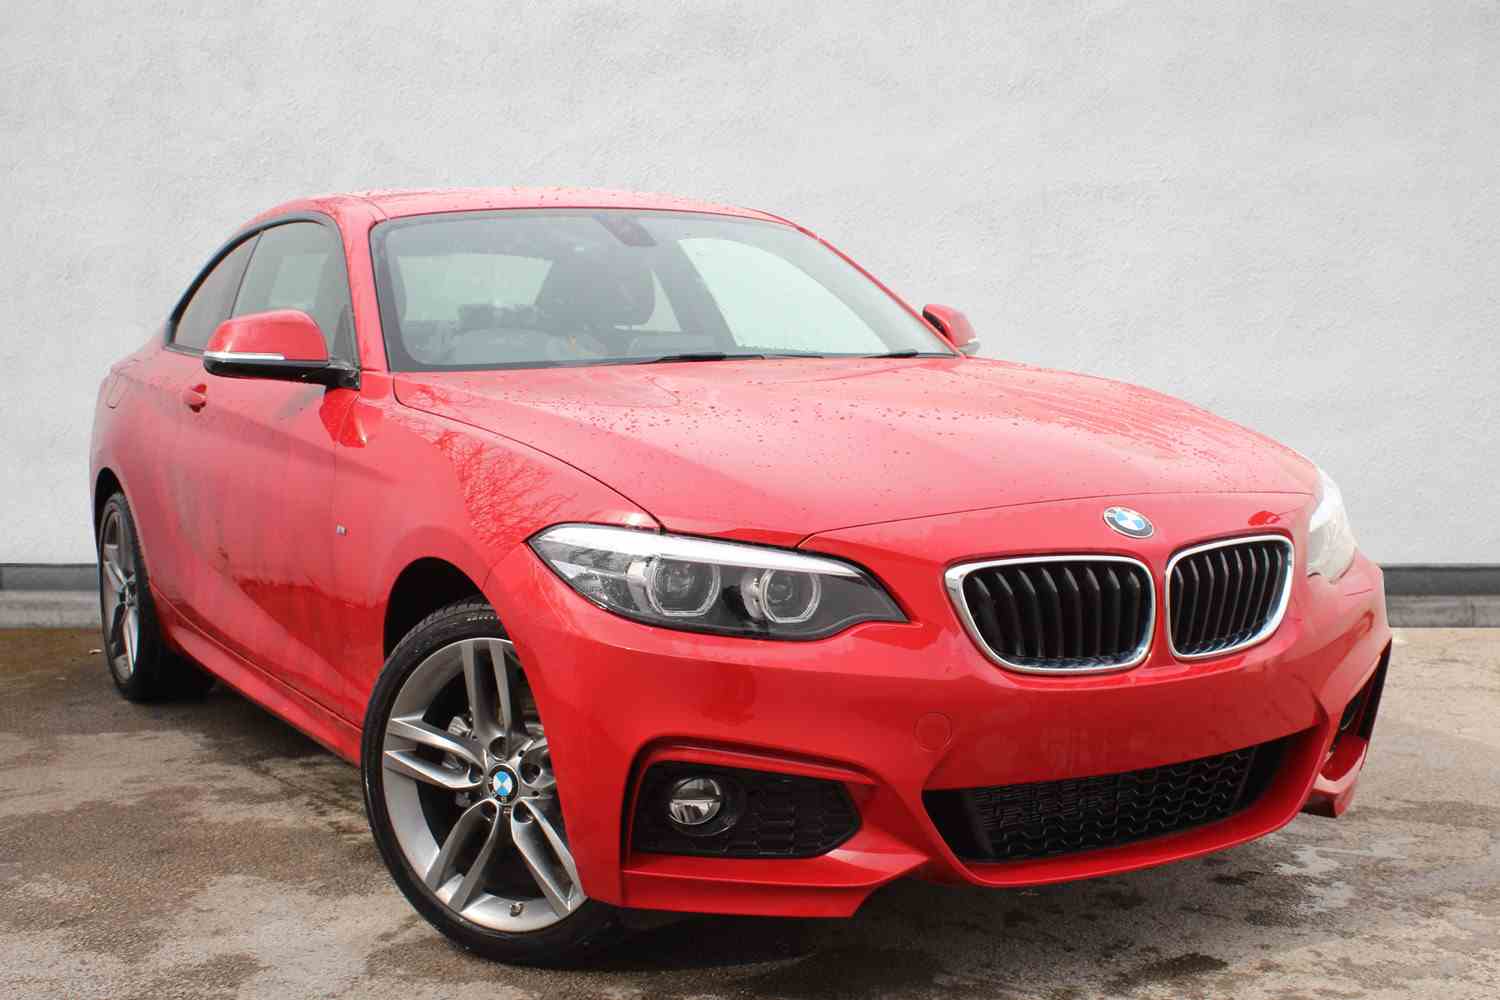 BMW Red Car Logo - Used BMW 2 Series Coupe Petrol in #Melbourne Red metallic from ...